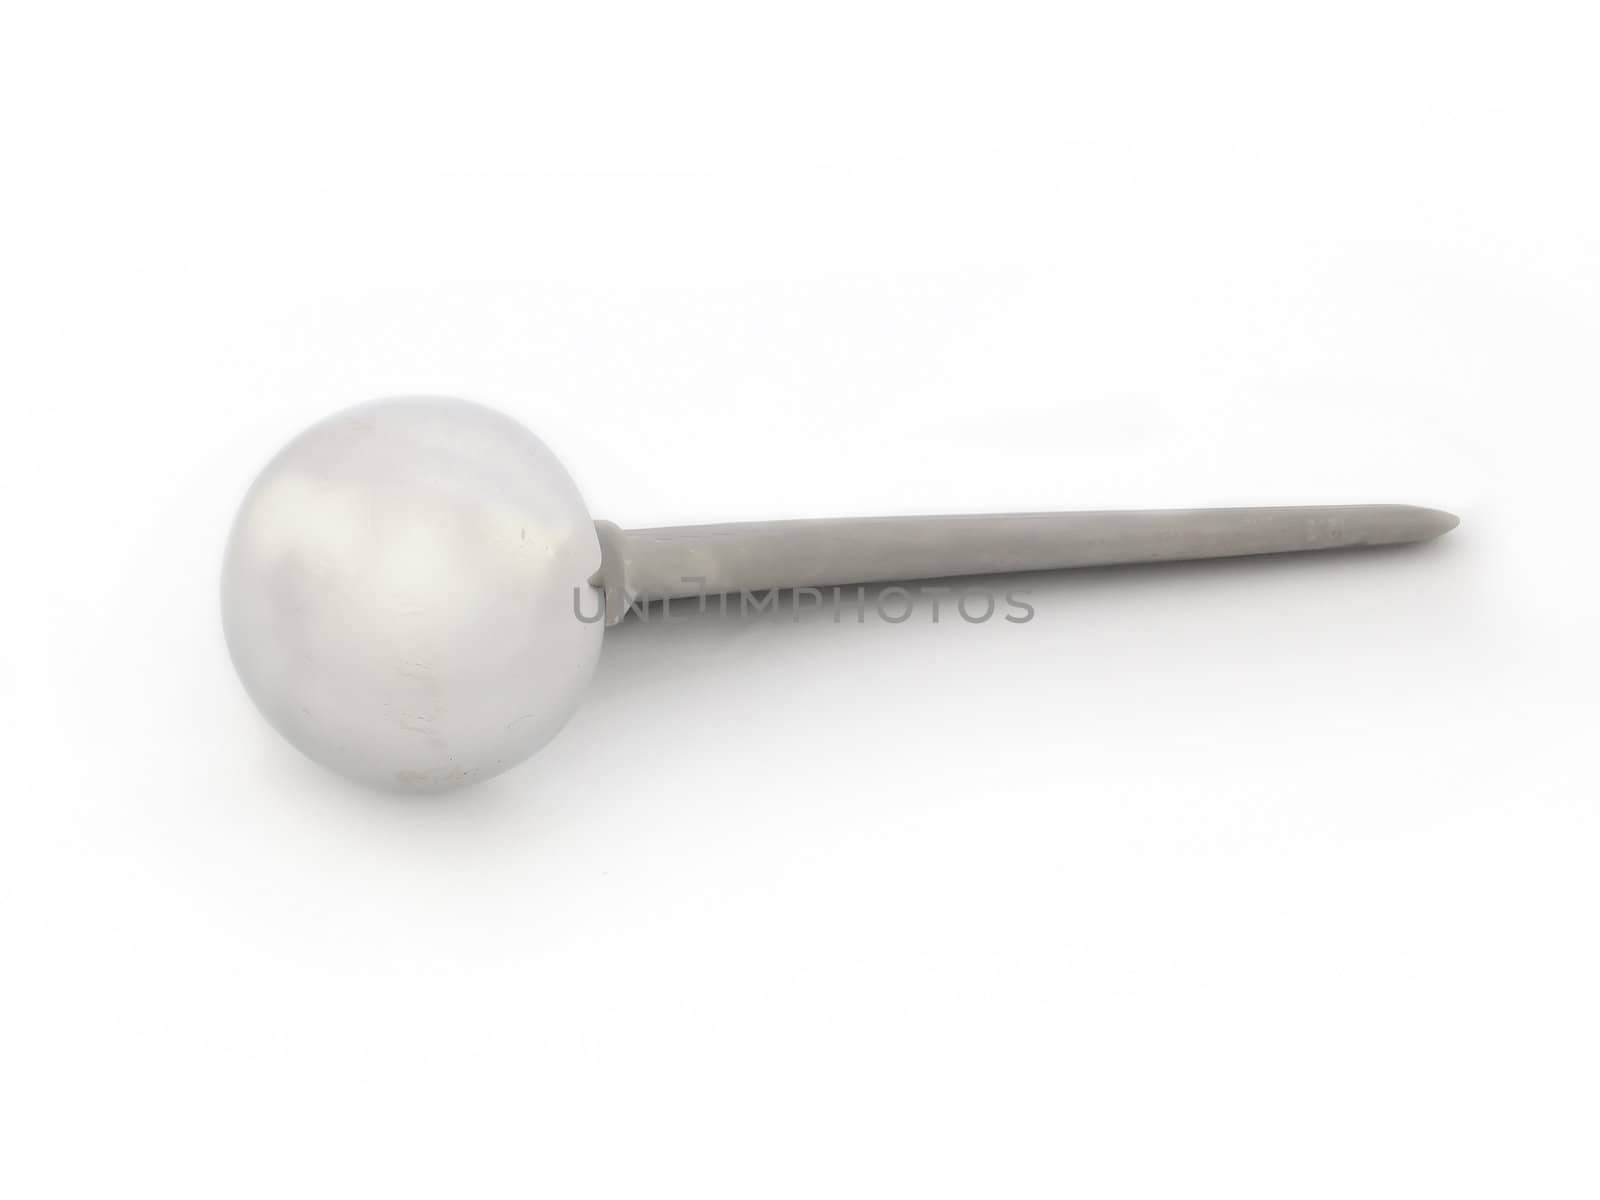 Hip prosthesis or artificial hip isolated on a white background. This prosthesis is used to replace the hip after a fracture or osteoarthritis.